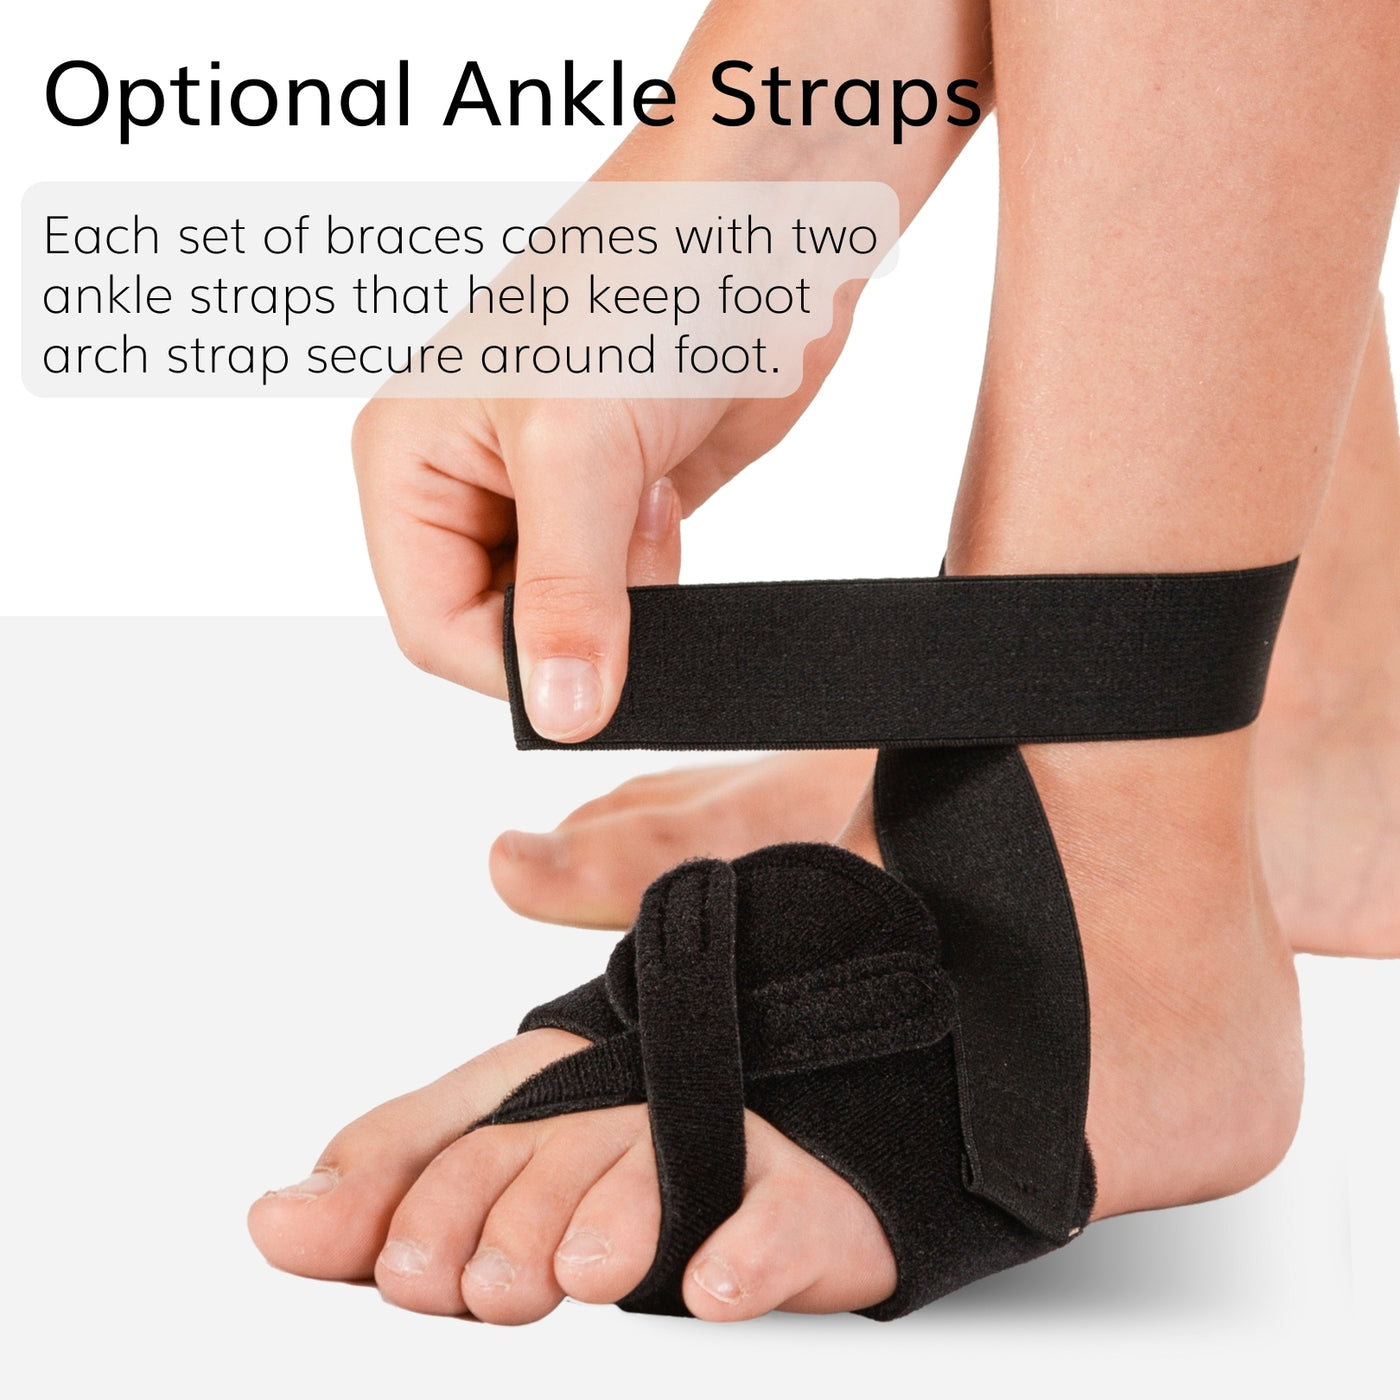 The toe walking braces come with a set of ankle straps to keep the brace on foot